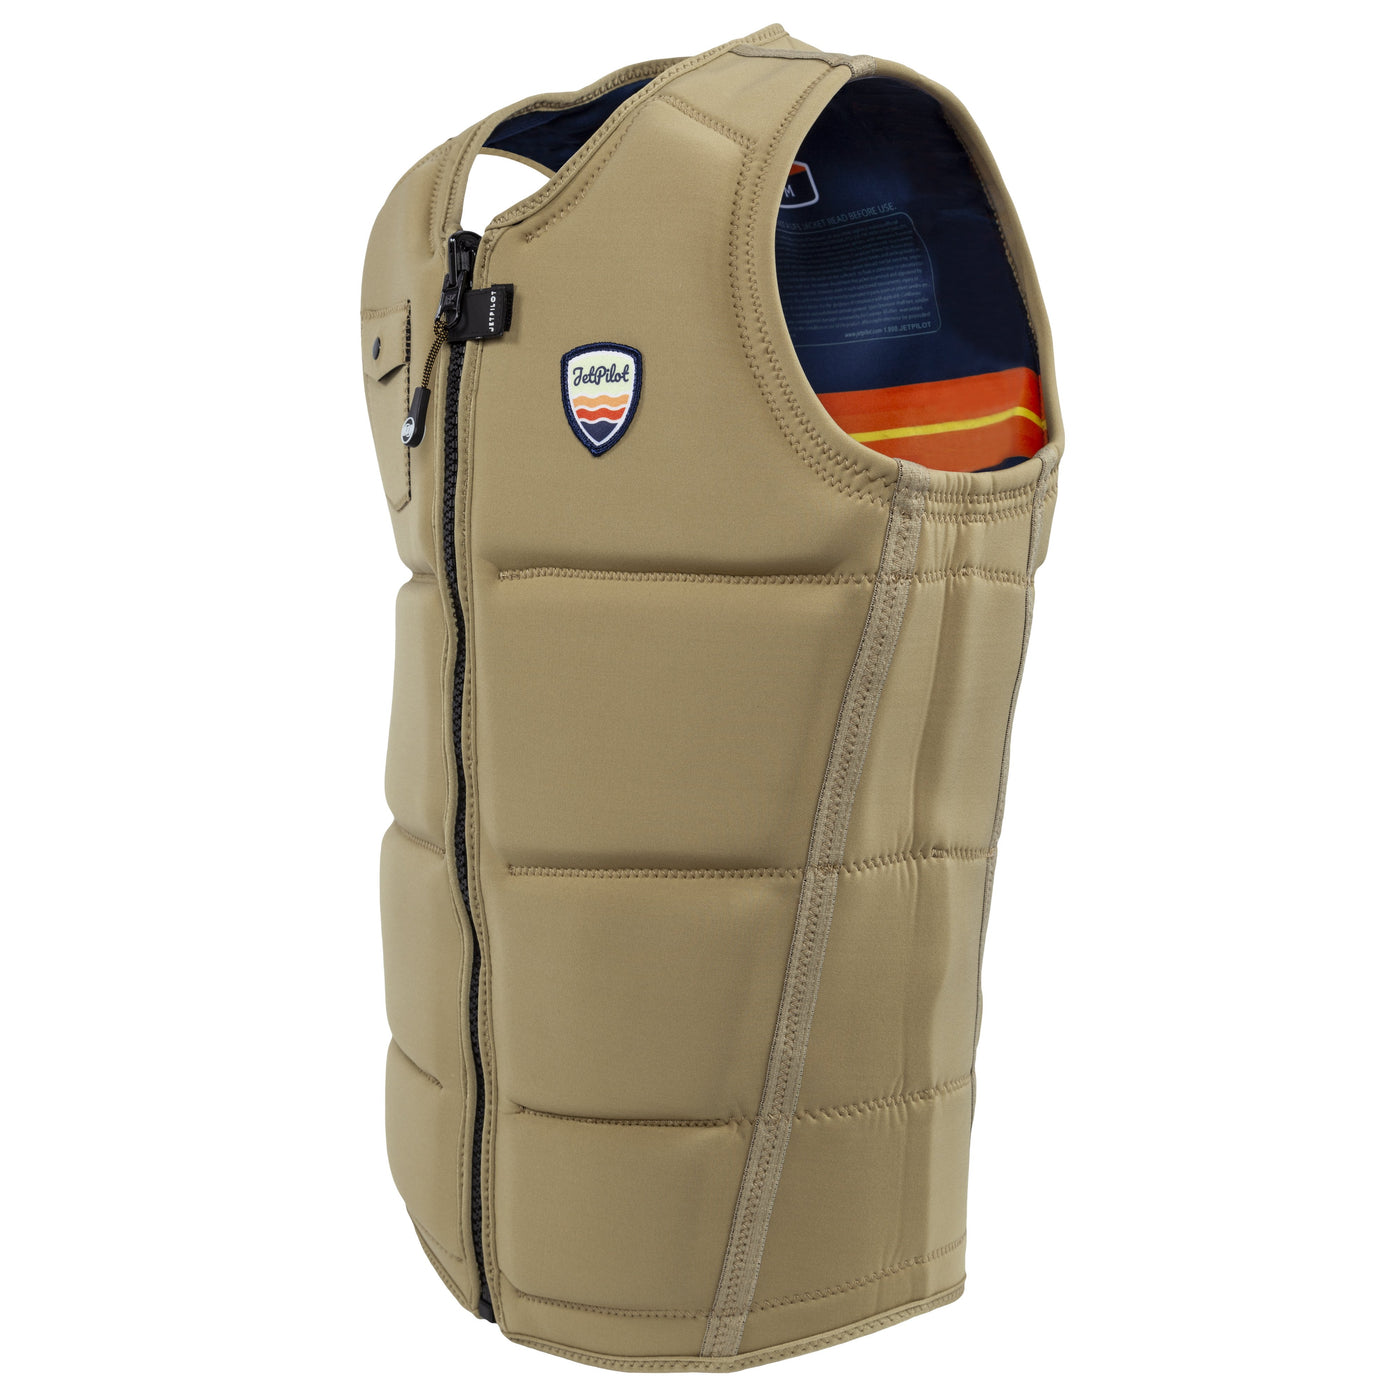 Side view of the Jetpilot's Aaron Rathy Signature Comp Vest Sand colorway side view photo